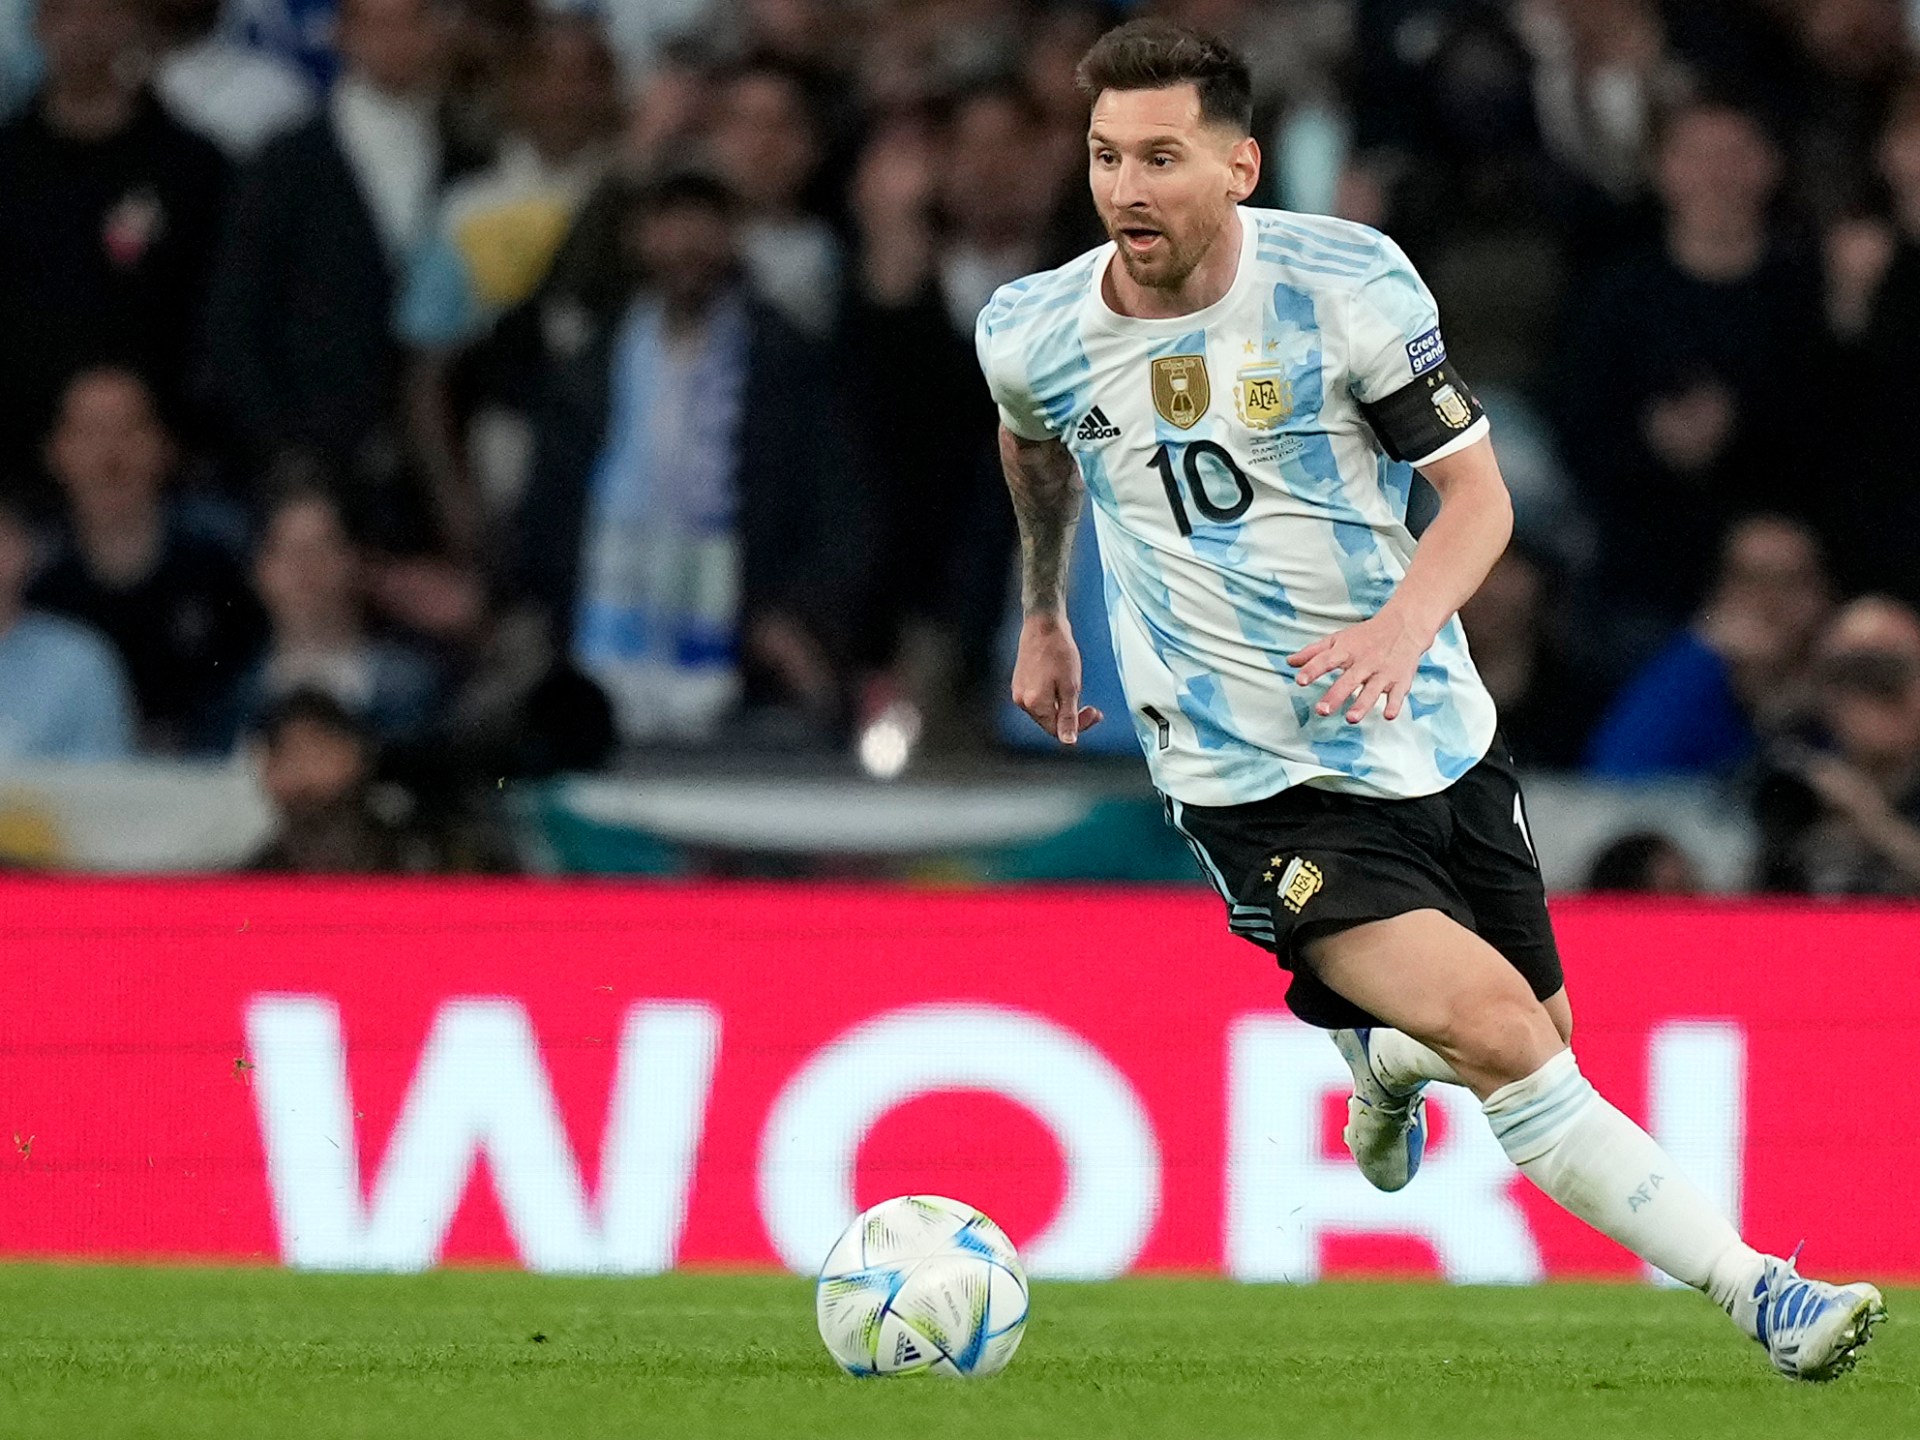 Messi skips World Cup coaching camp as Argentina hit by accidents